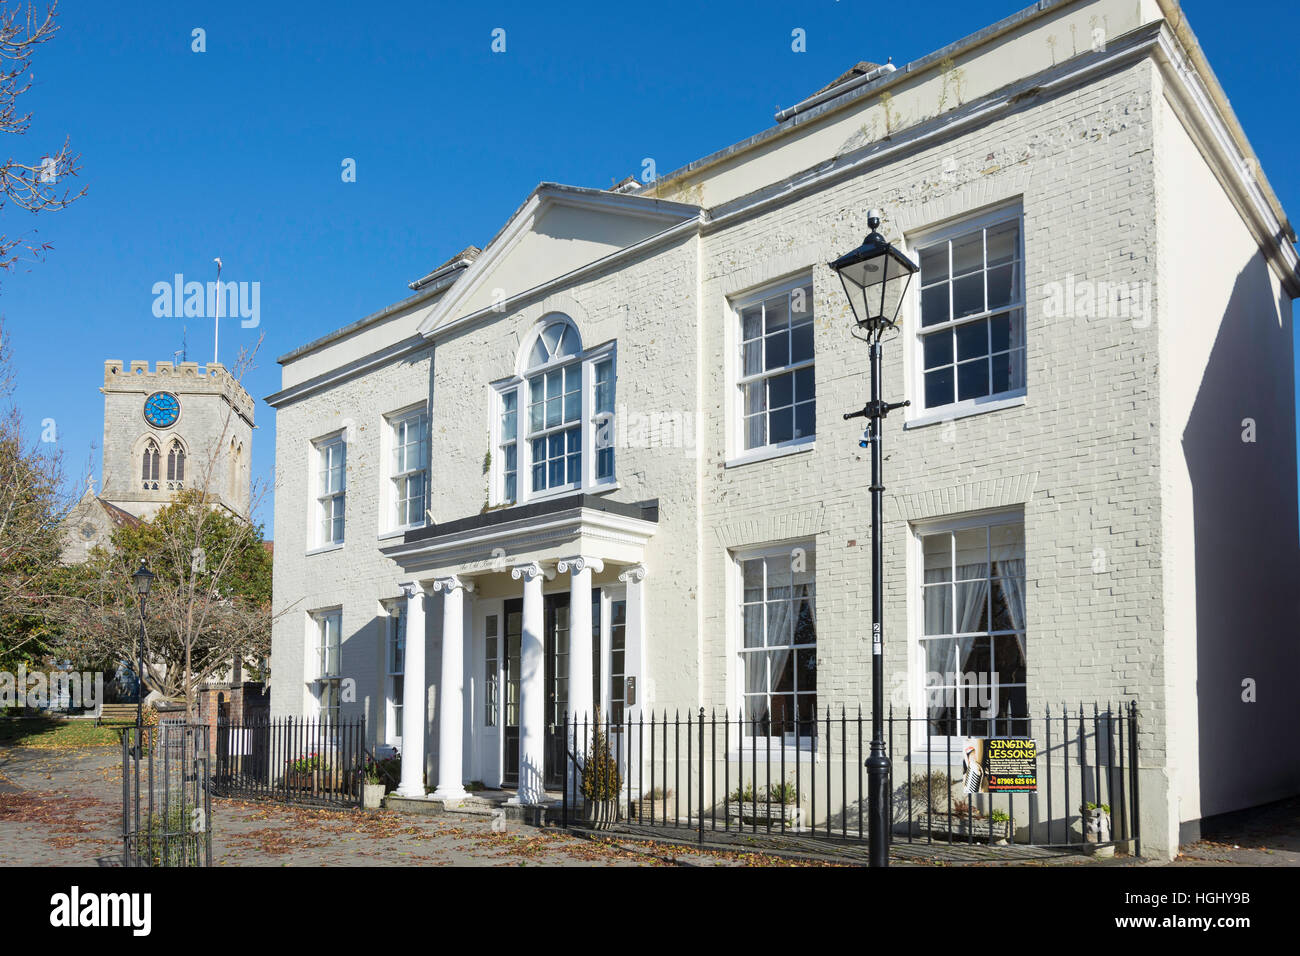 The Old Bank House and Church of St Peter and St Paul, Market Place, Ringwood, Hampshire, England, United Kingdom Stock Photo